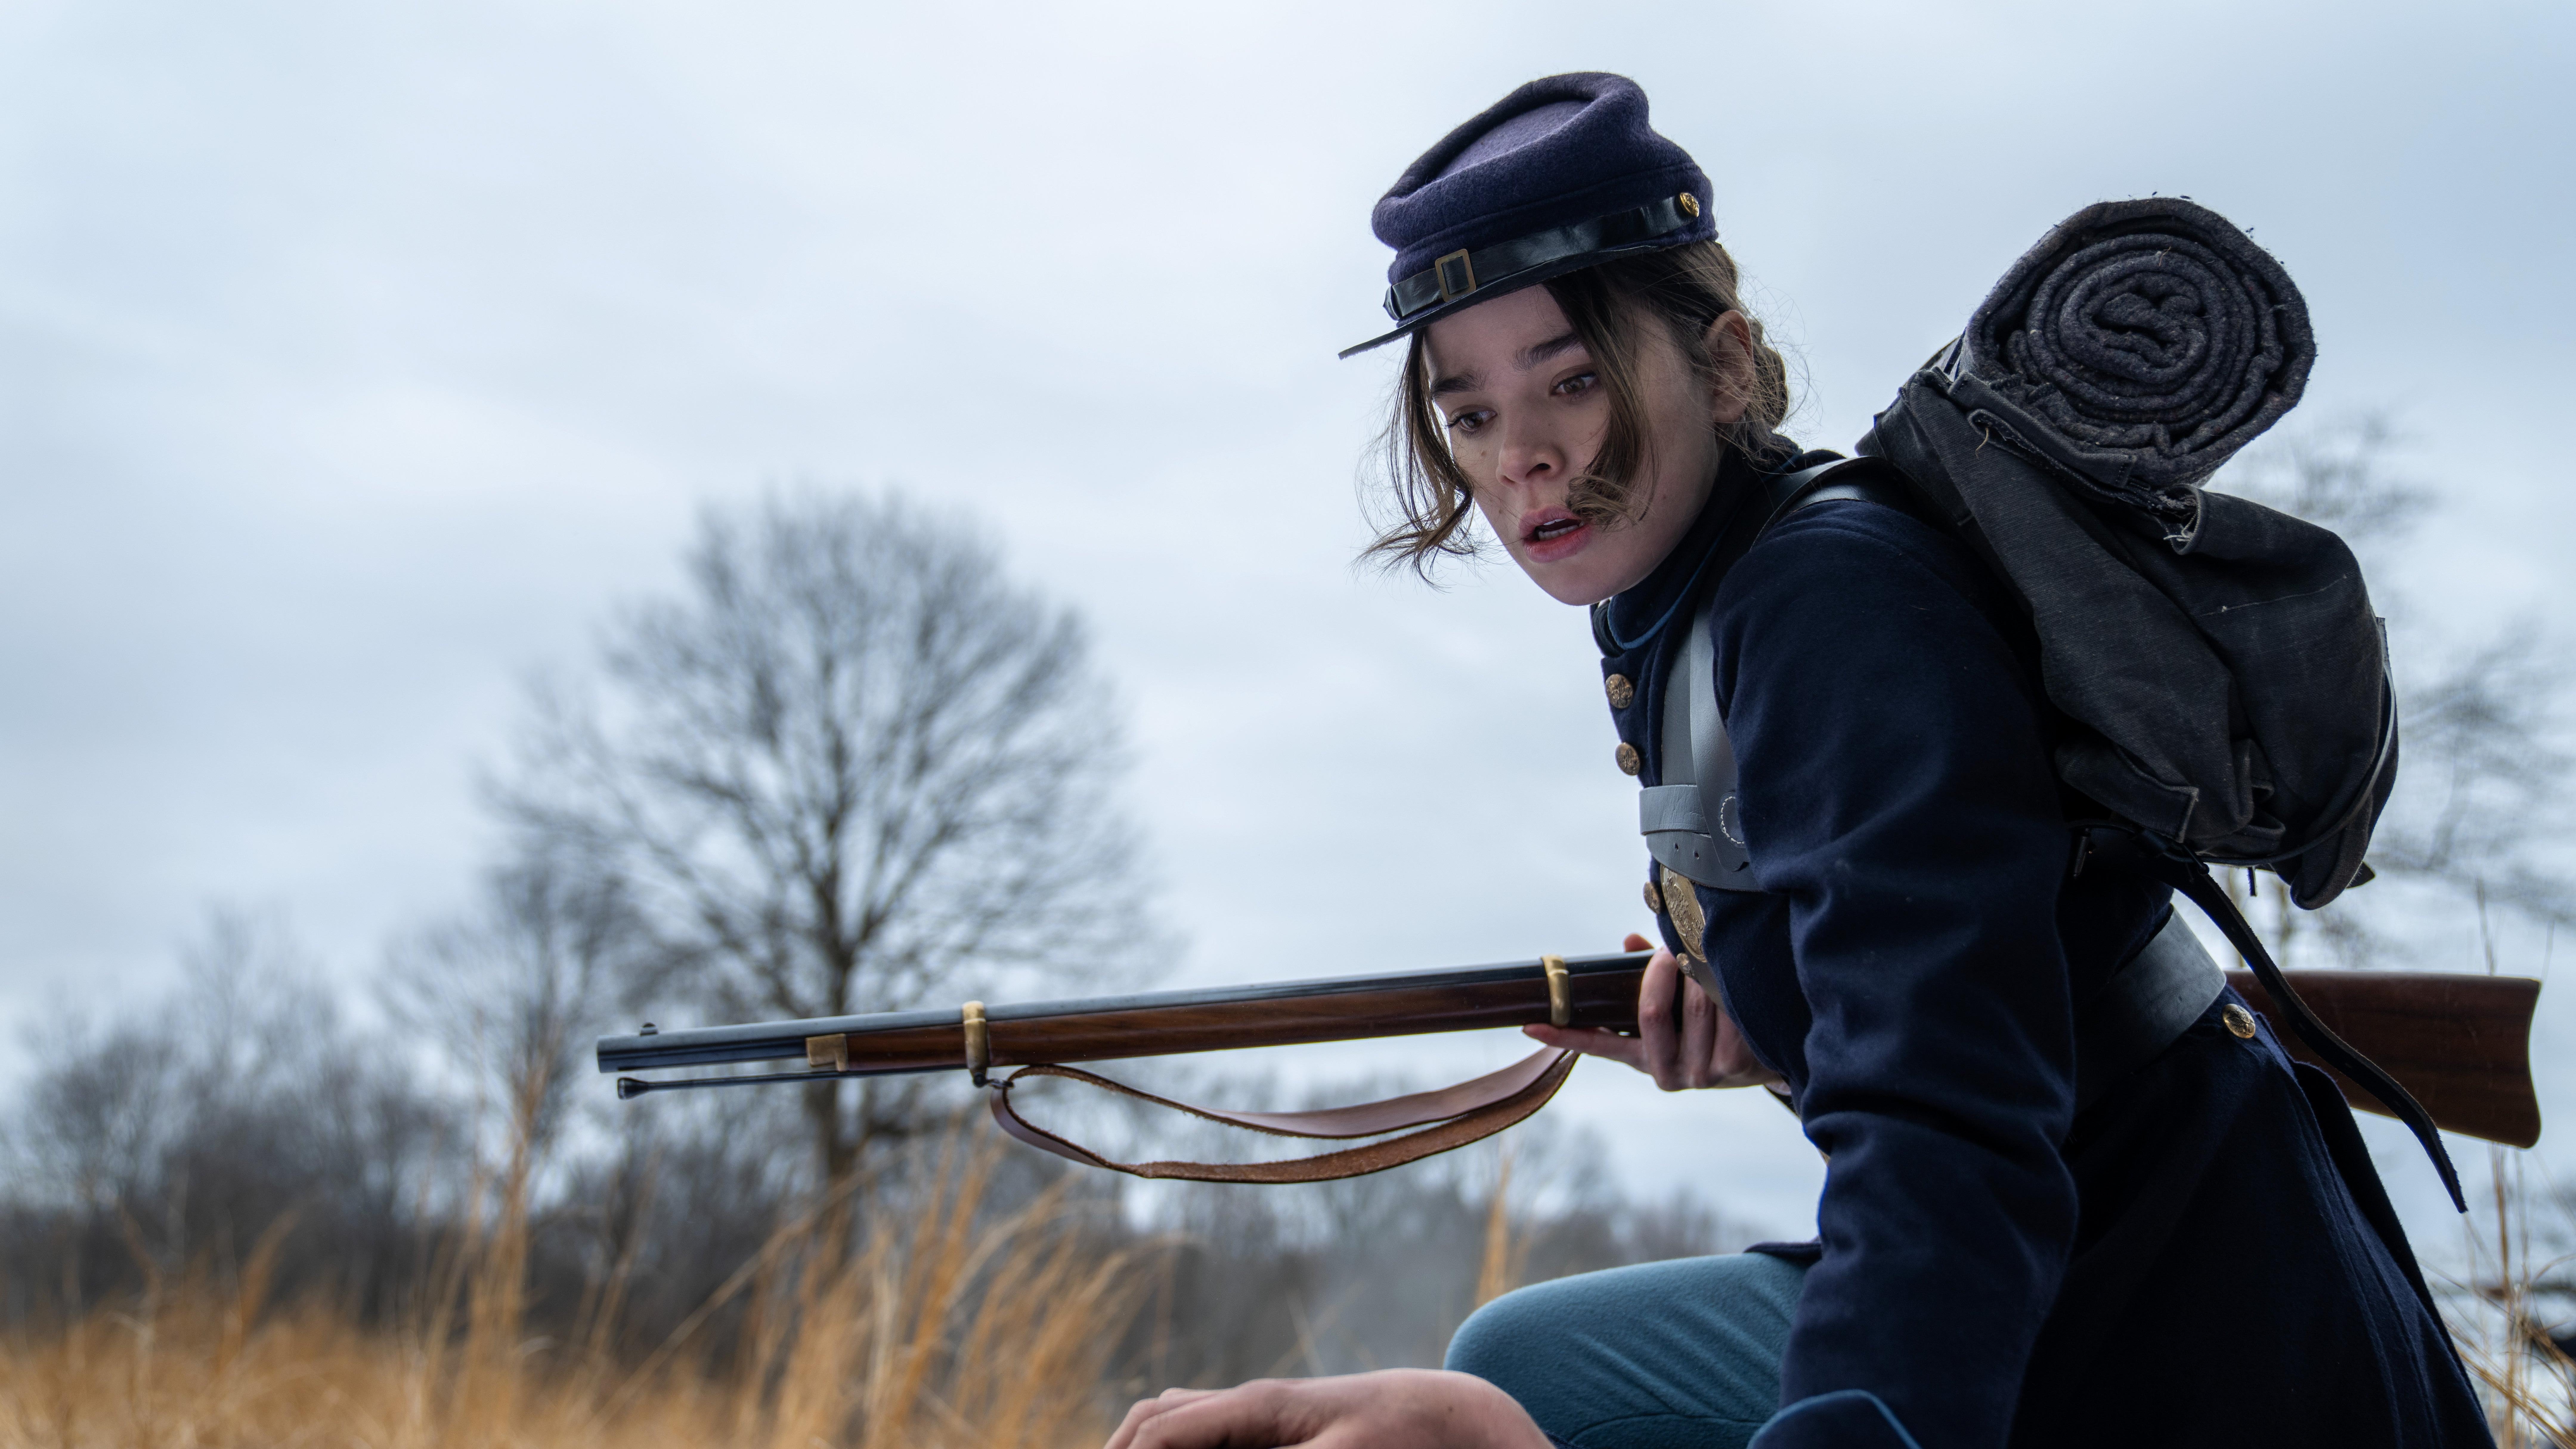 Hailee Steinfeld goes to war in the third and final season of Dickinson, premiering this November